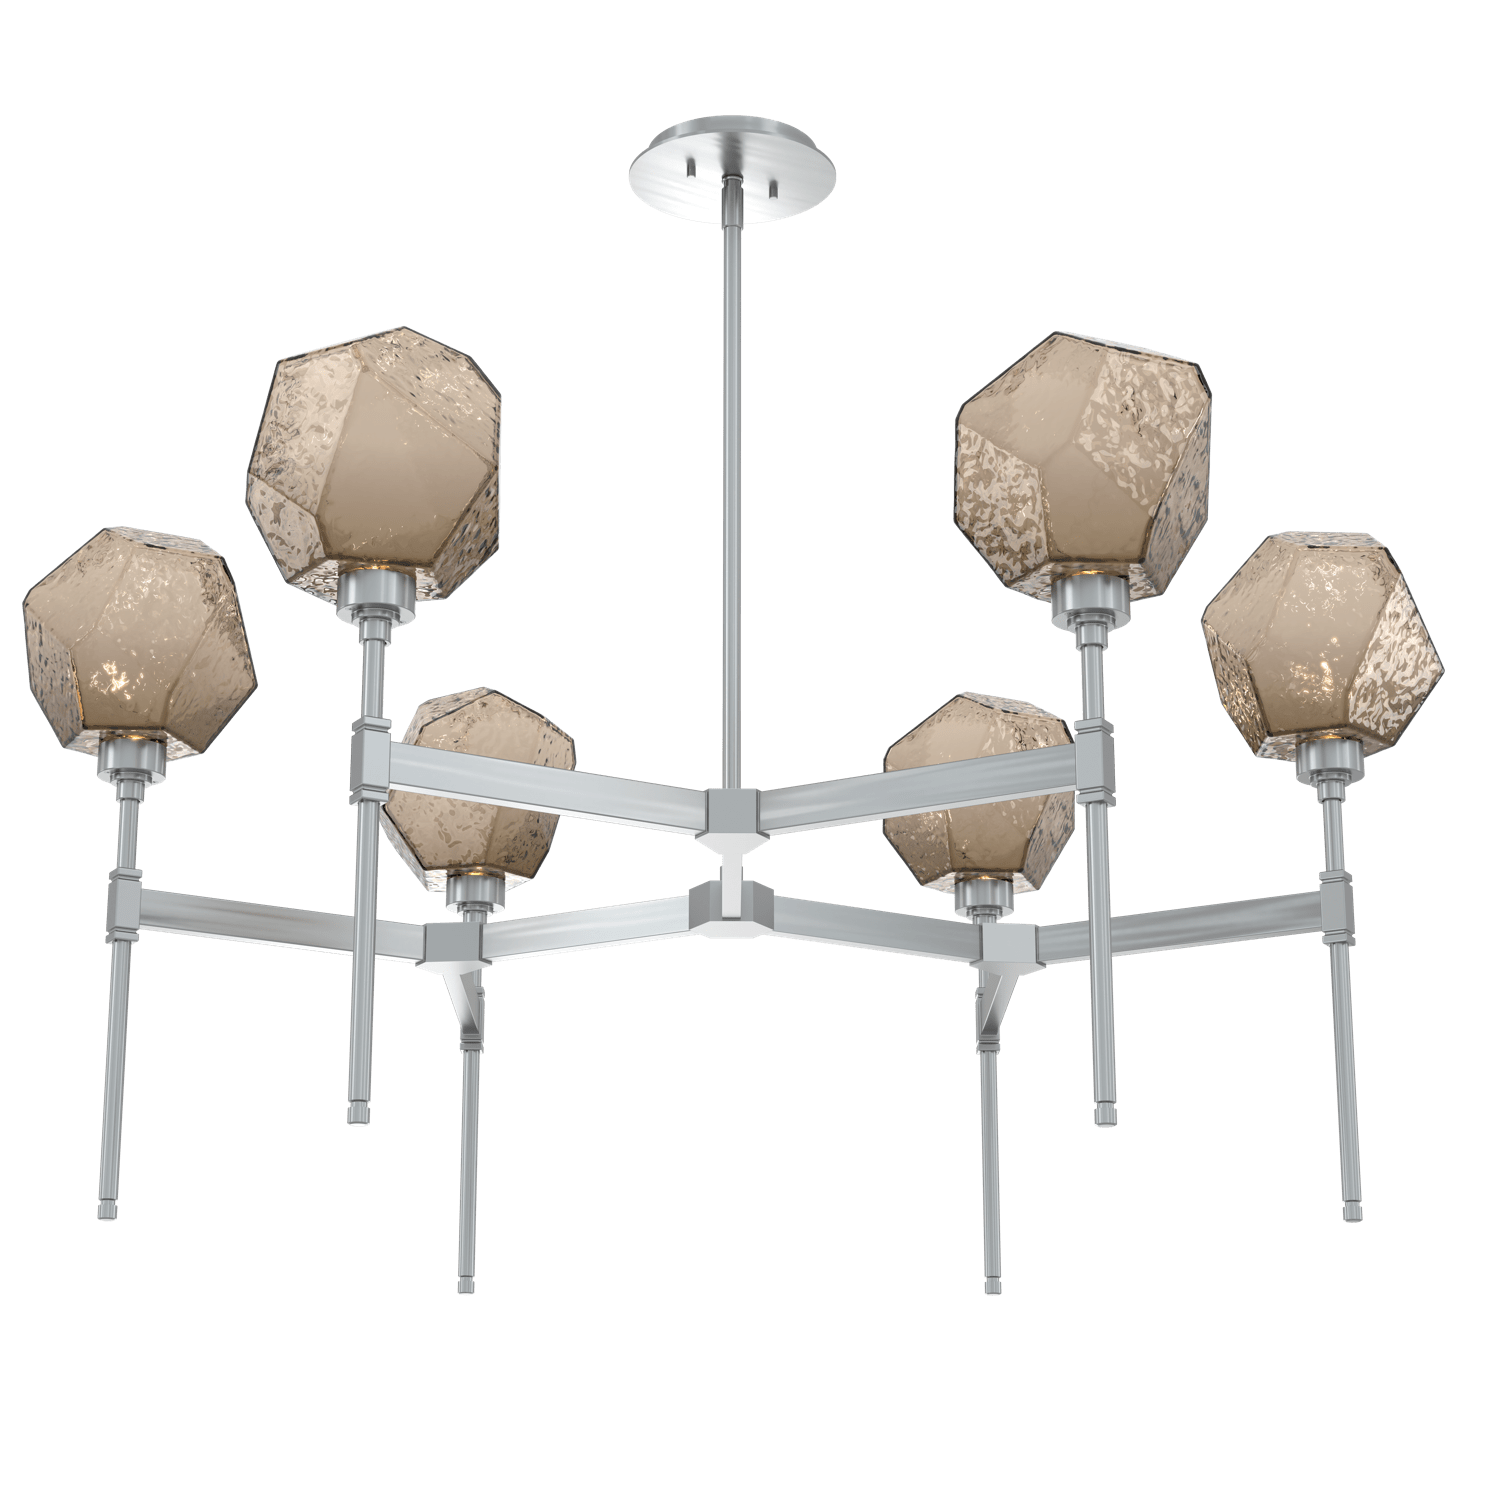 CHB0039-39-SN-B-Hammerton-Studio-Gem-round-belvedere-chandelier-with-satin-nickel-finish-and-bronze-blown-glass-shades-and-LED-lamping